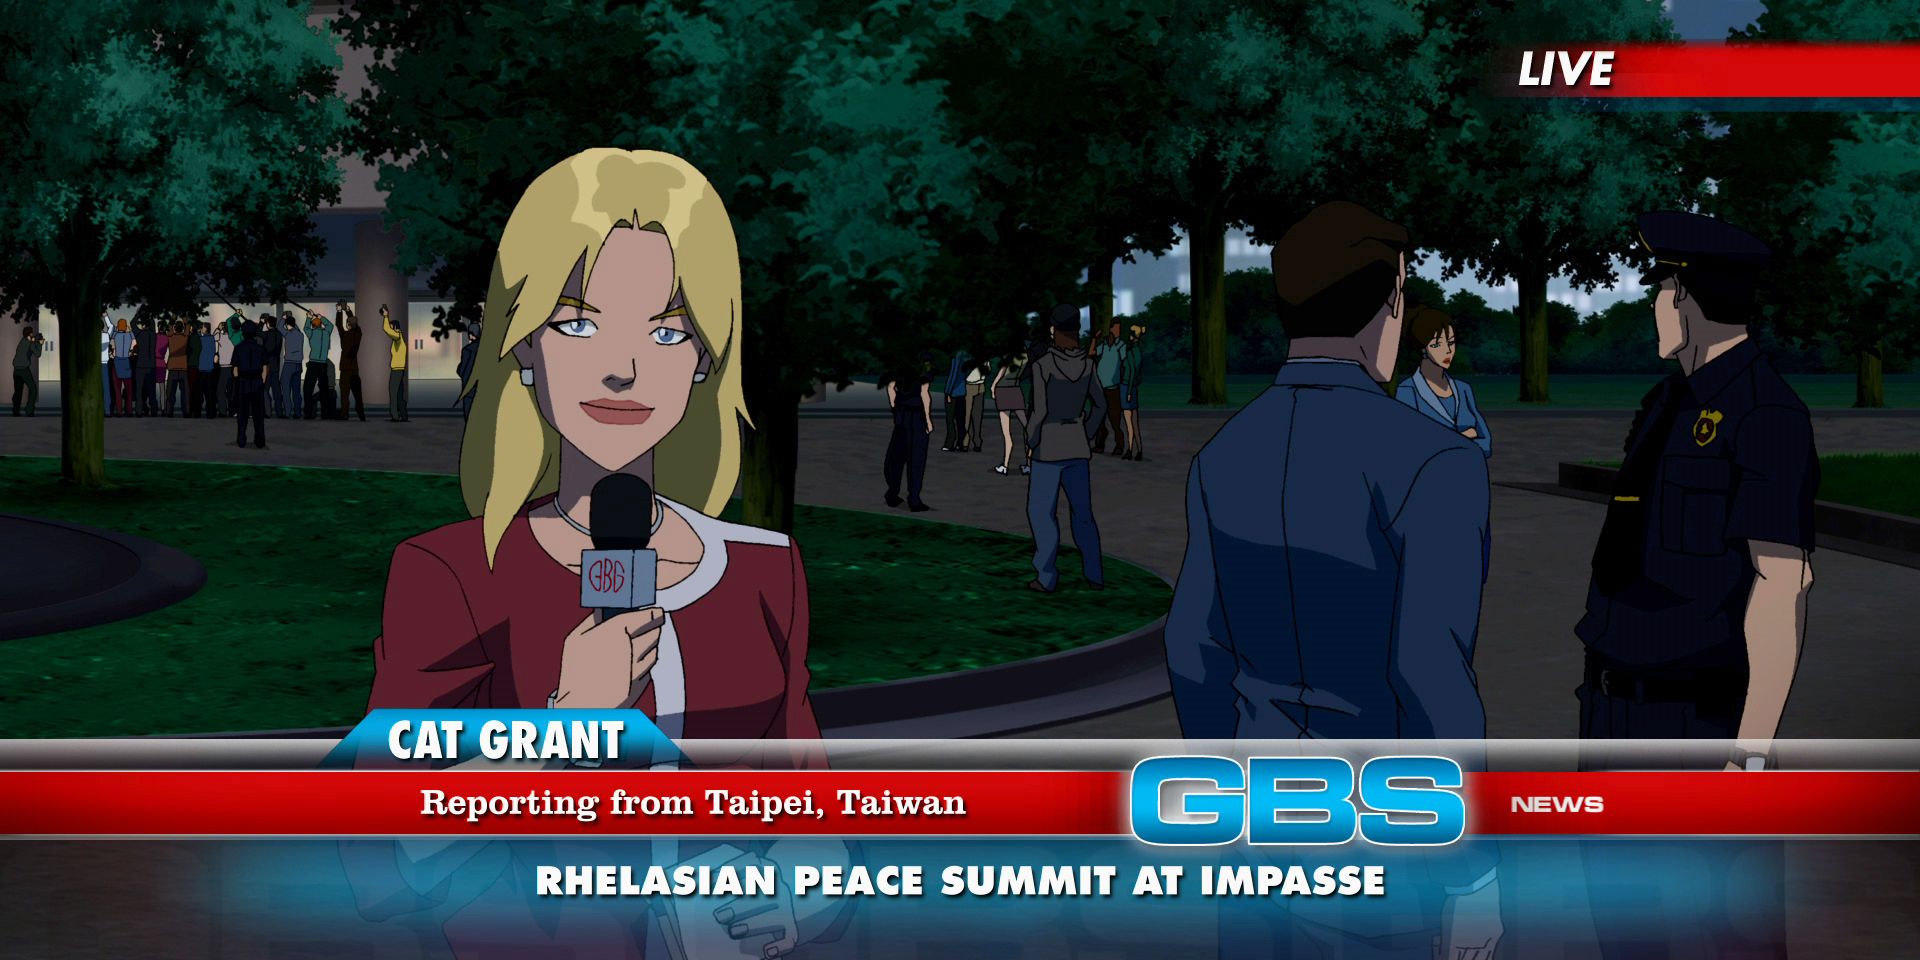 Cat Grant in Young Justice